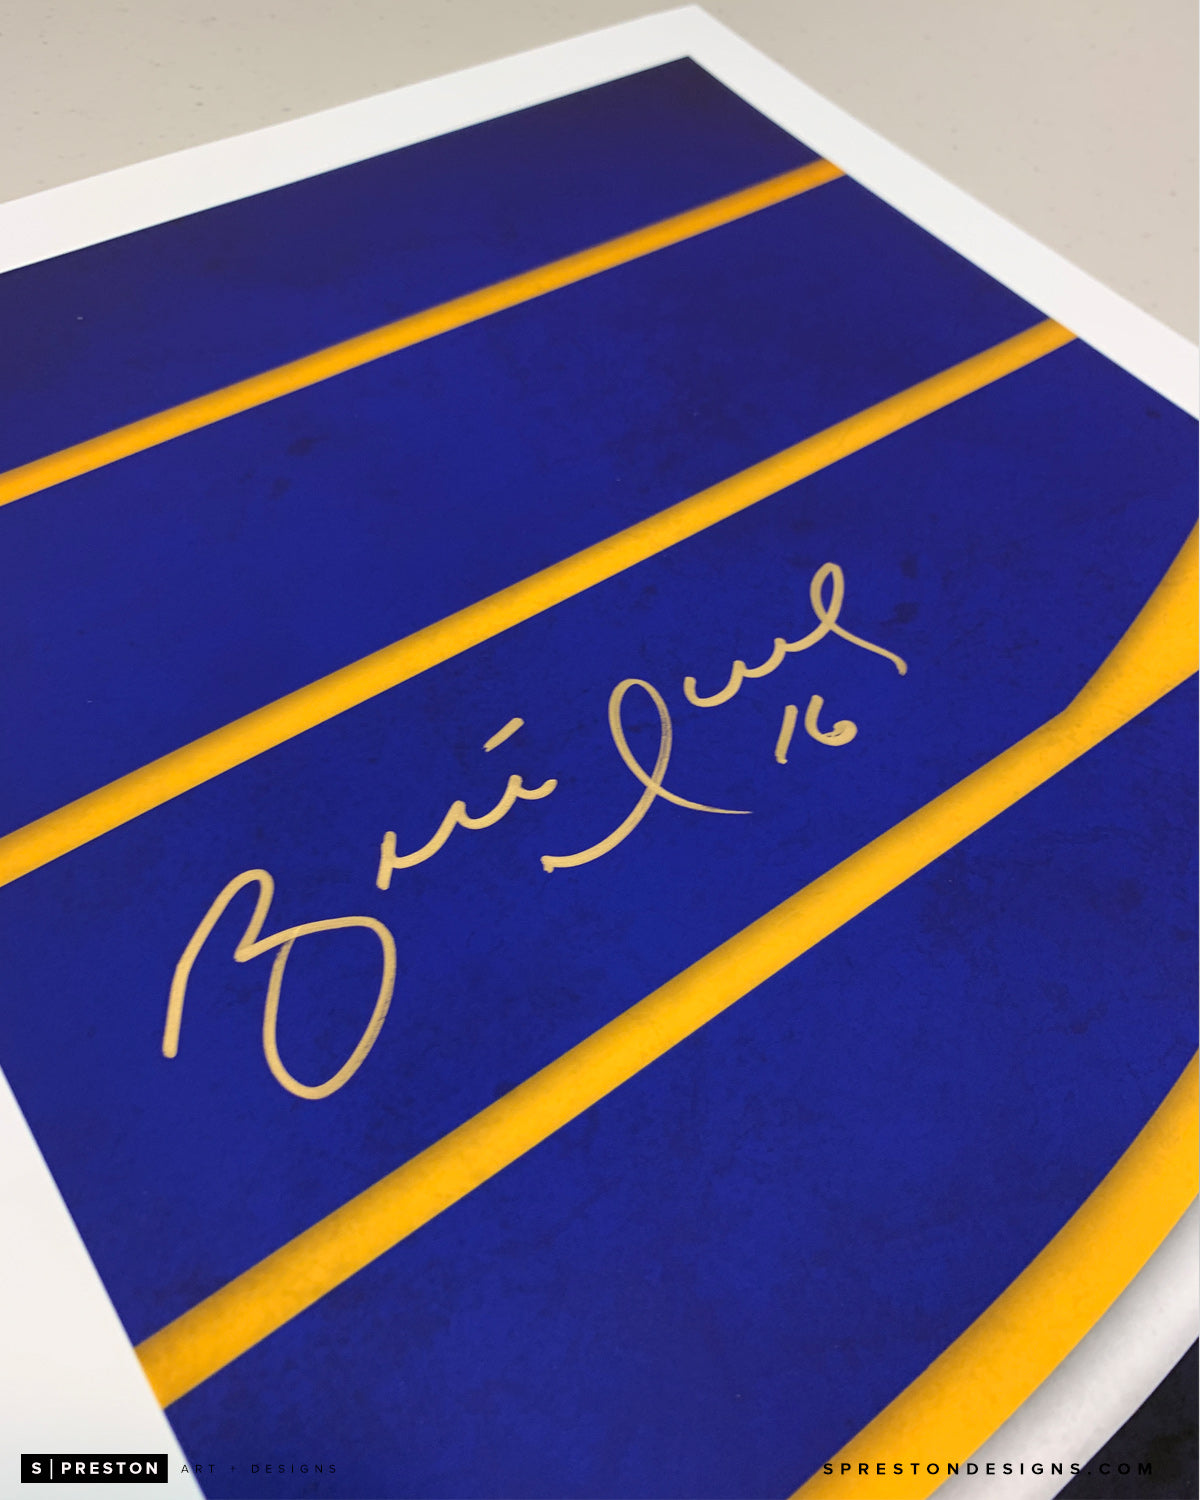 Brett Hull Autographed Signed St. Louis Blues Framed Jersey 